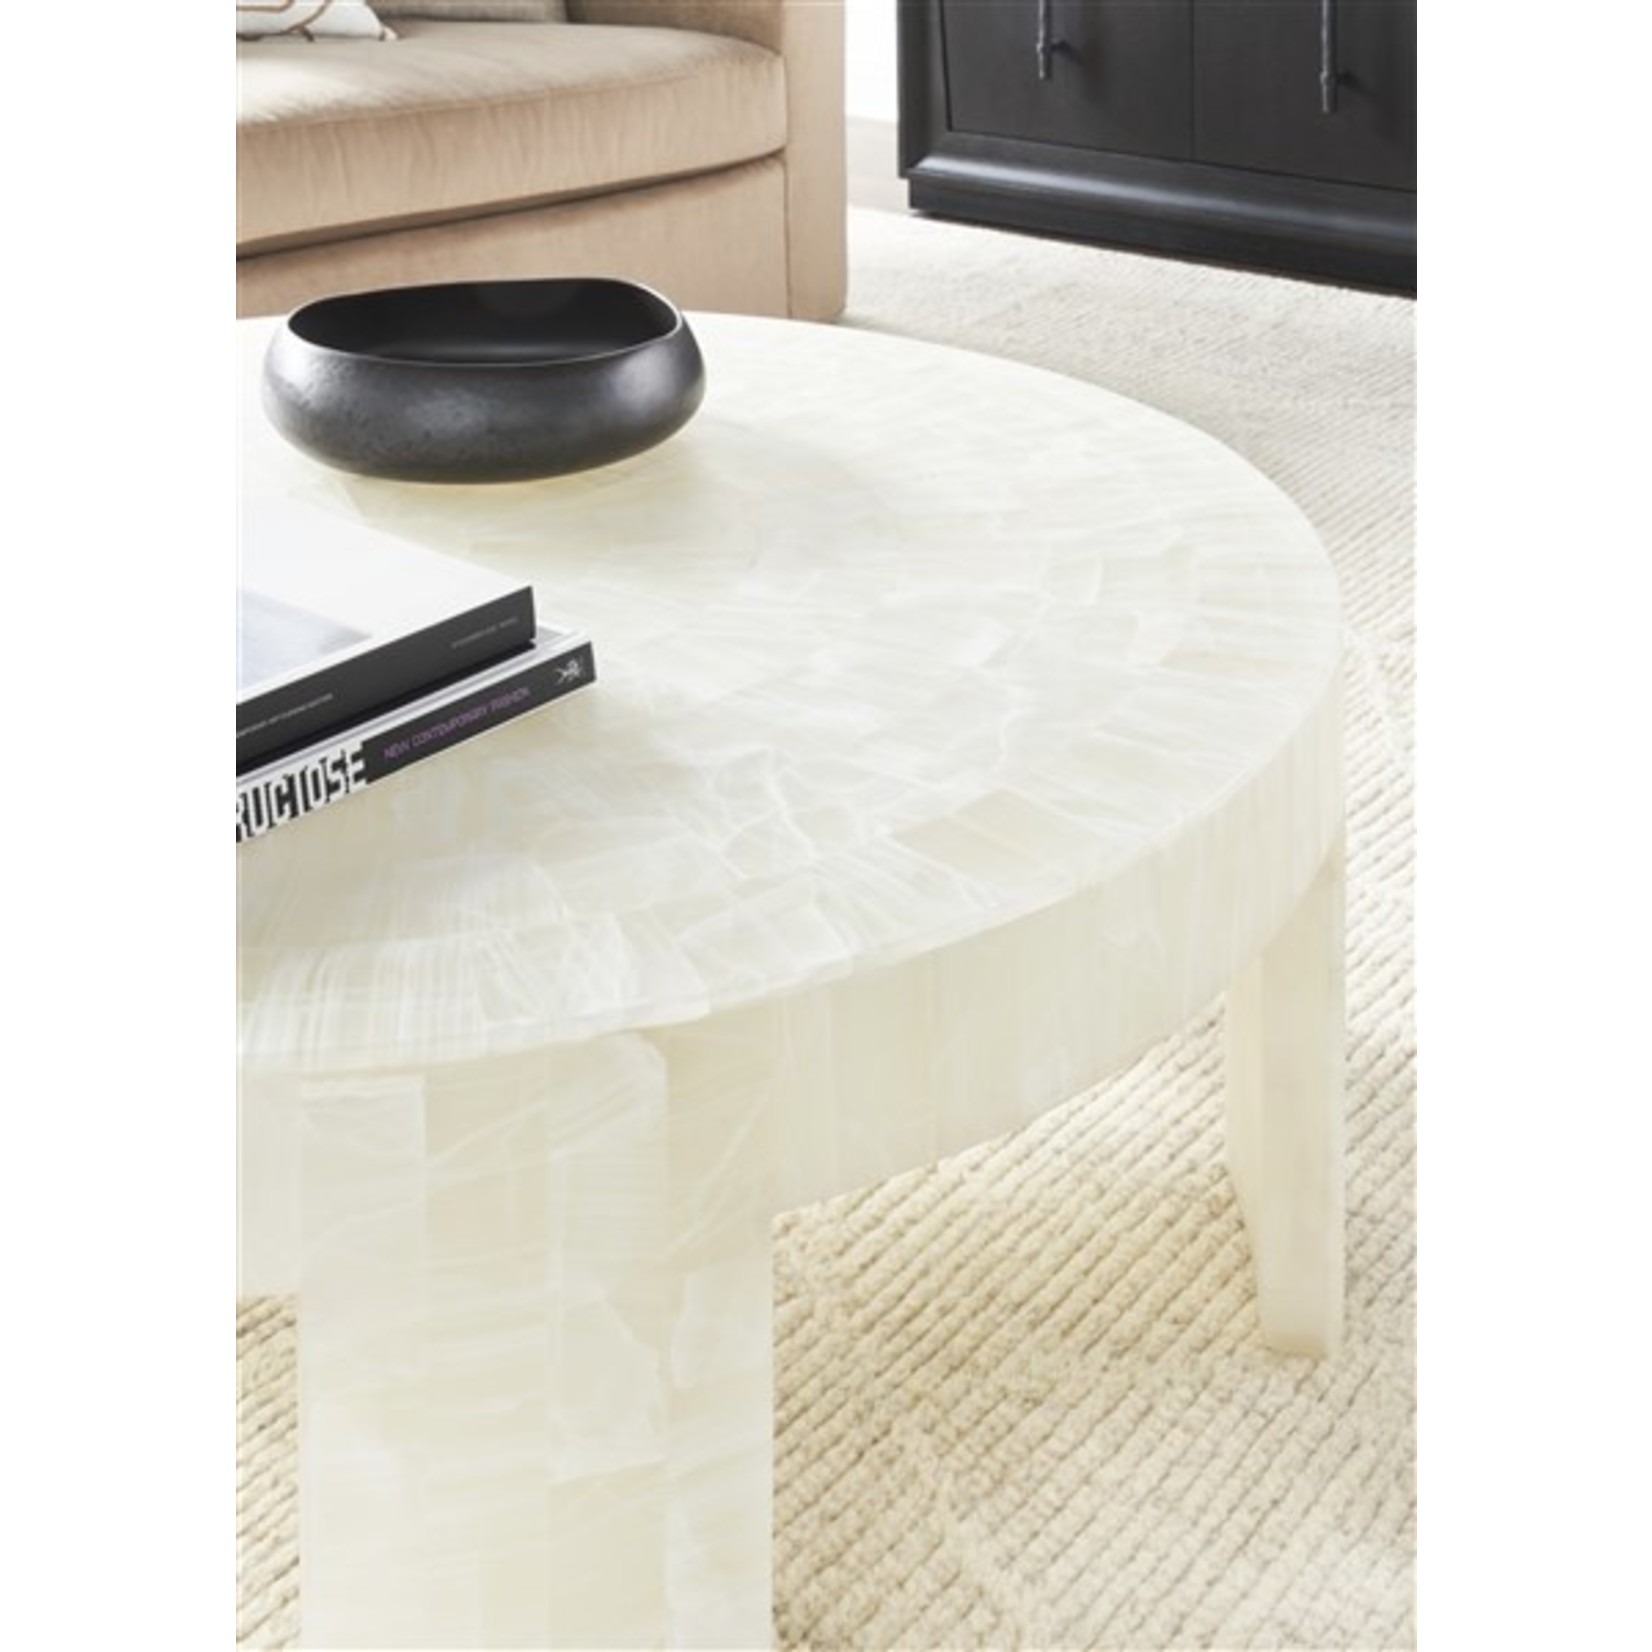 Vanguard Furniture Meridian Round Cocktail Table in Bricked Cloud Onyx